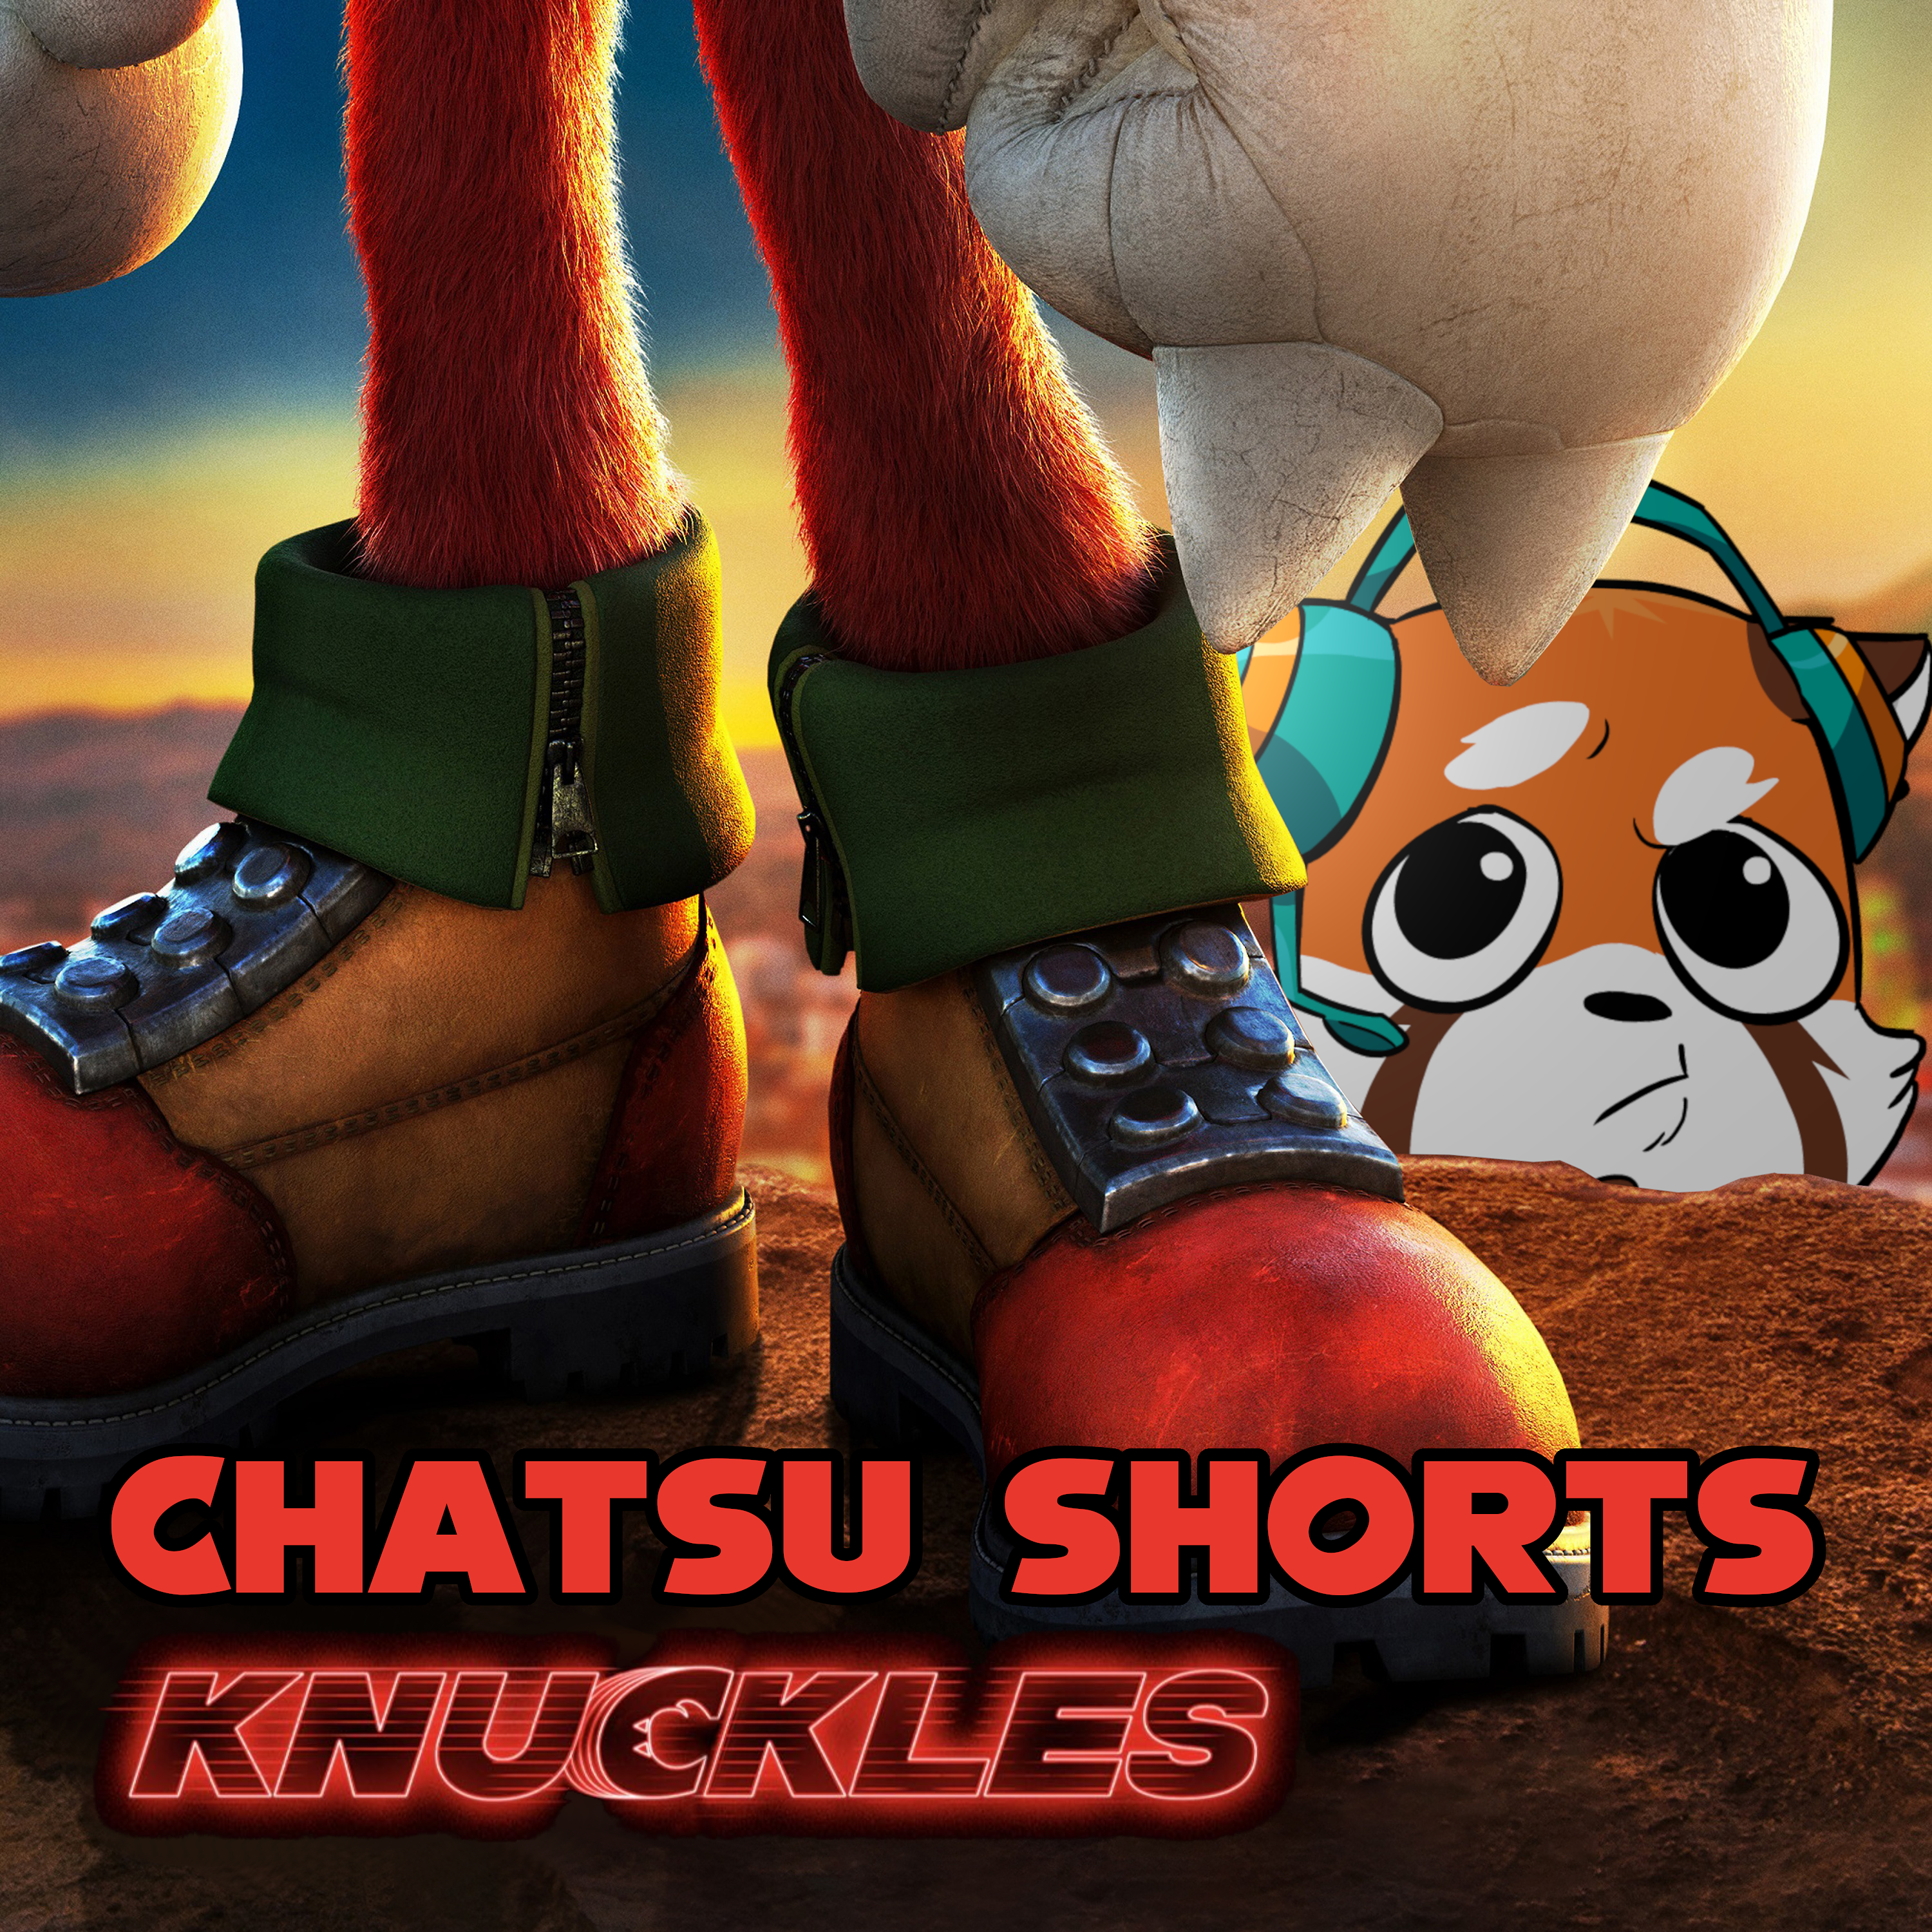 Who is this show for? A Review of Knuckles || Chatsu Shorts (SPOILERS)